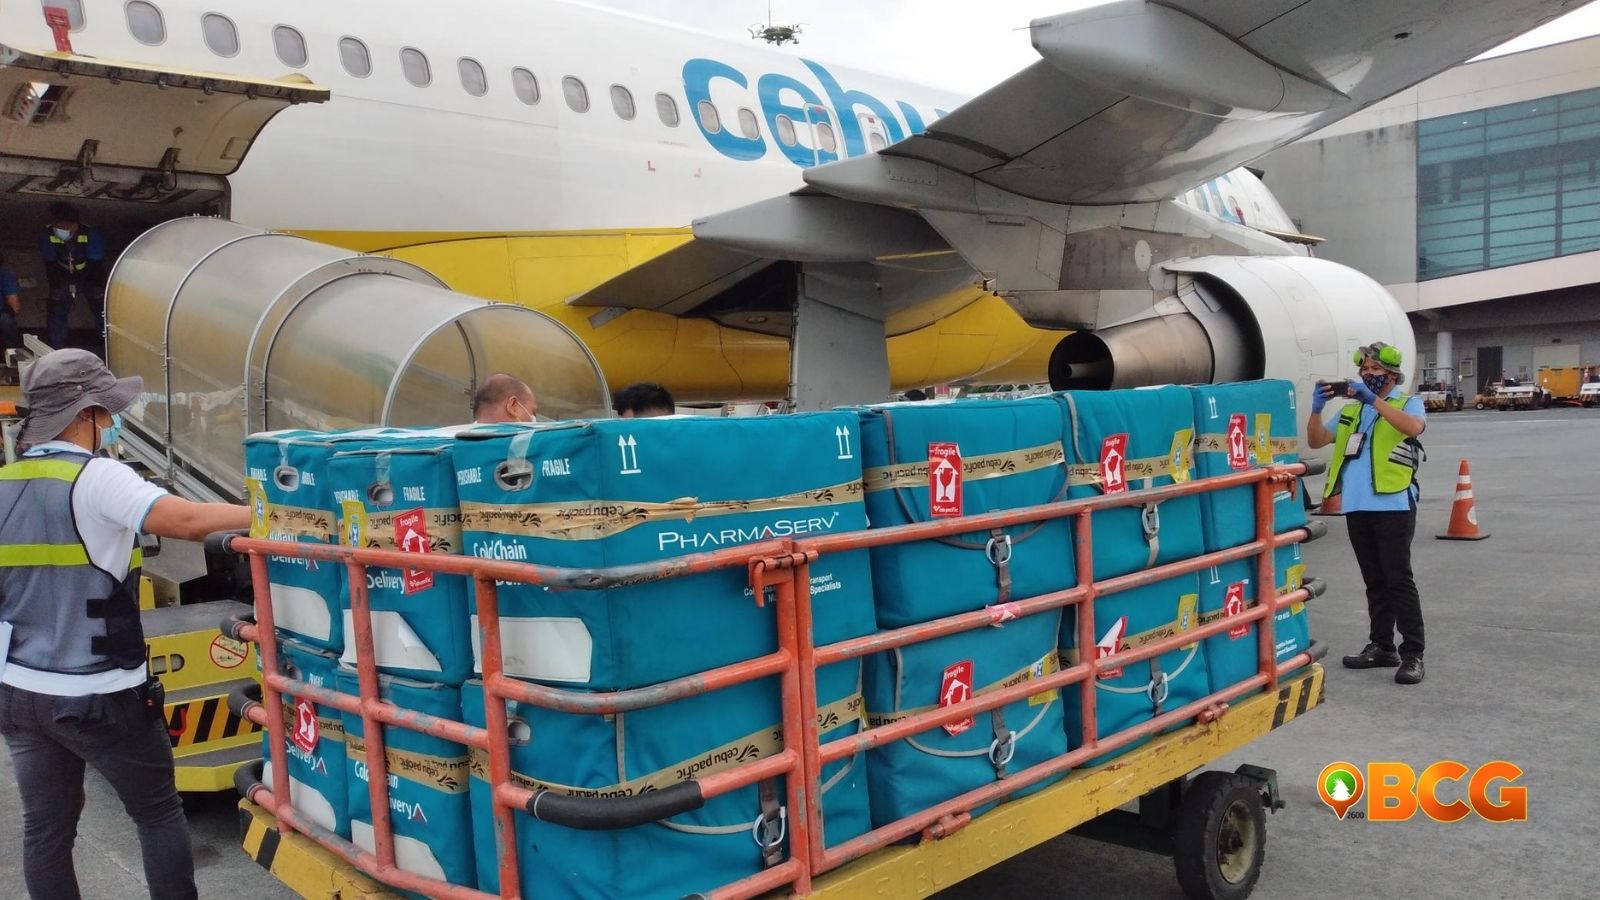 Vaccines Being loaded at Cebu Pacific